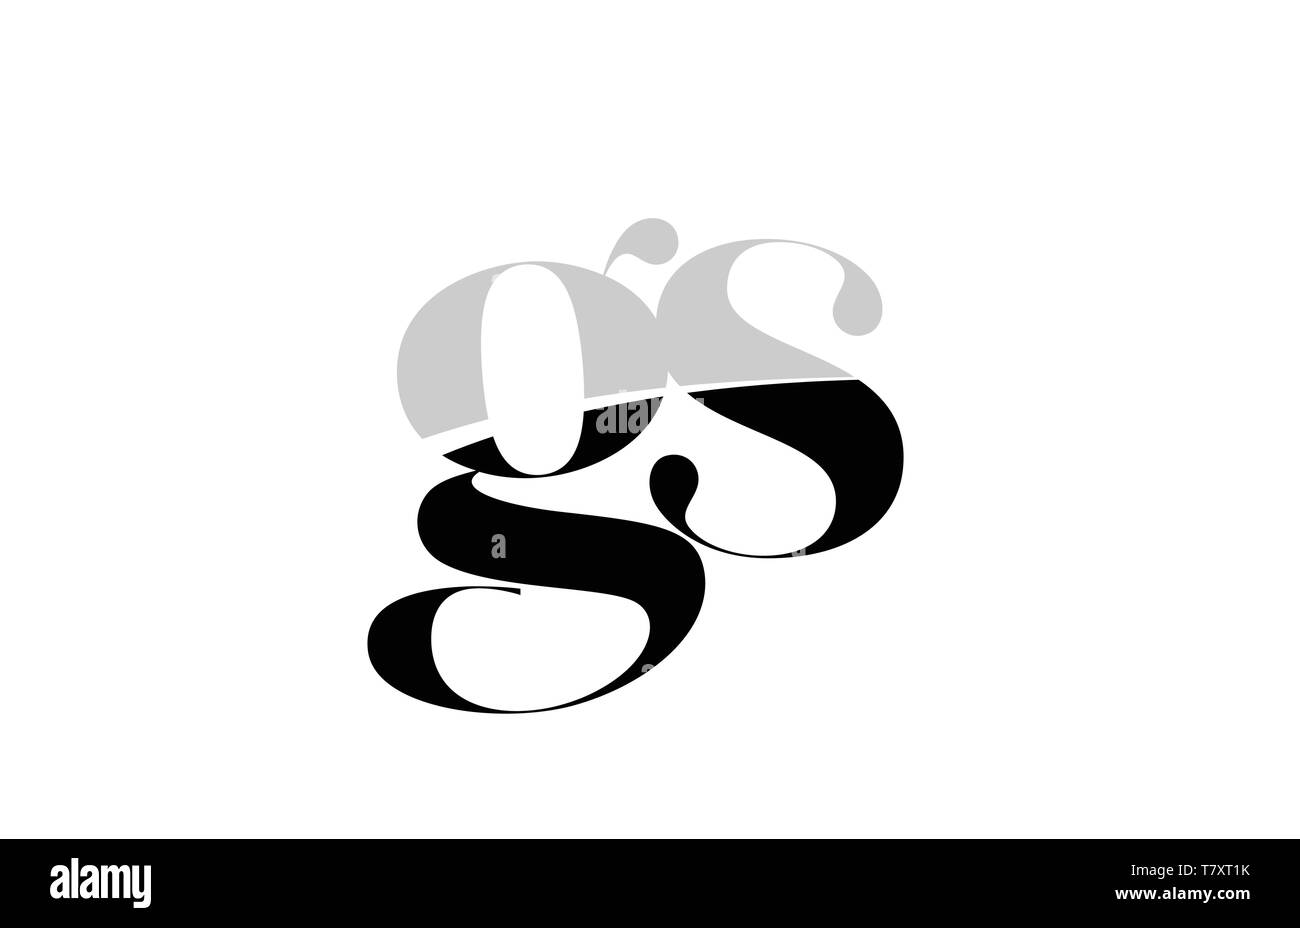 black and white alphabet letter gs g s logo icon design for a company or business Stock Vector